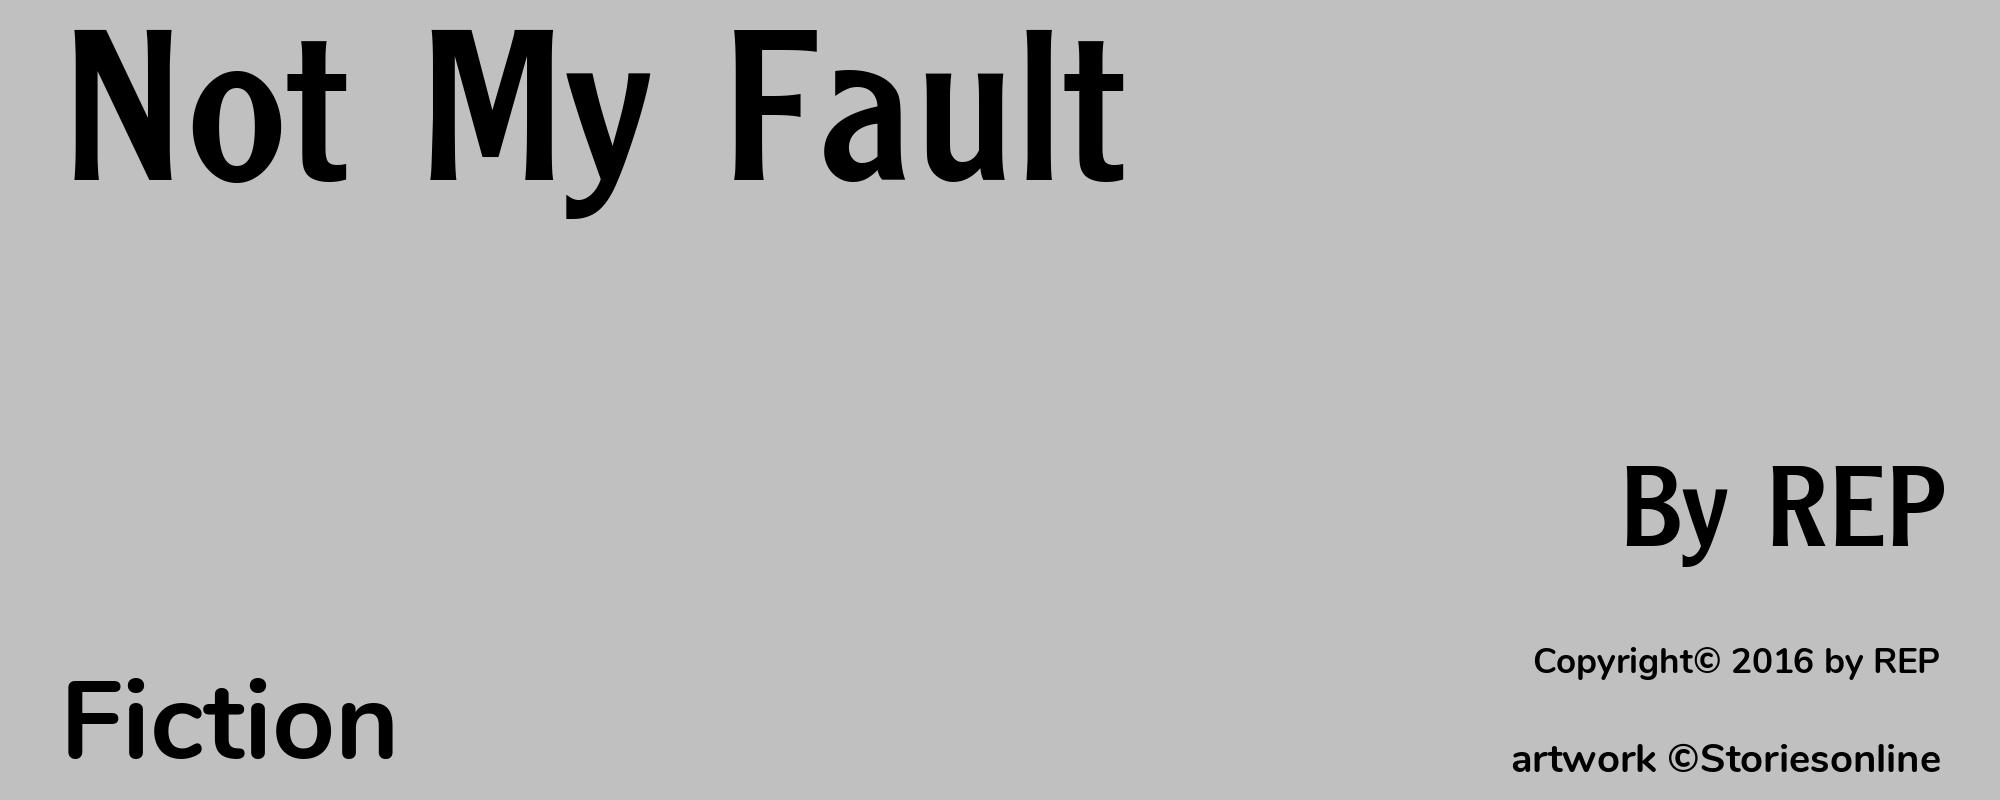 Not My Fault - Cover